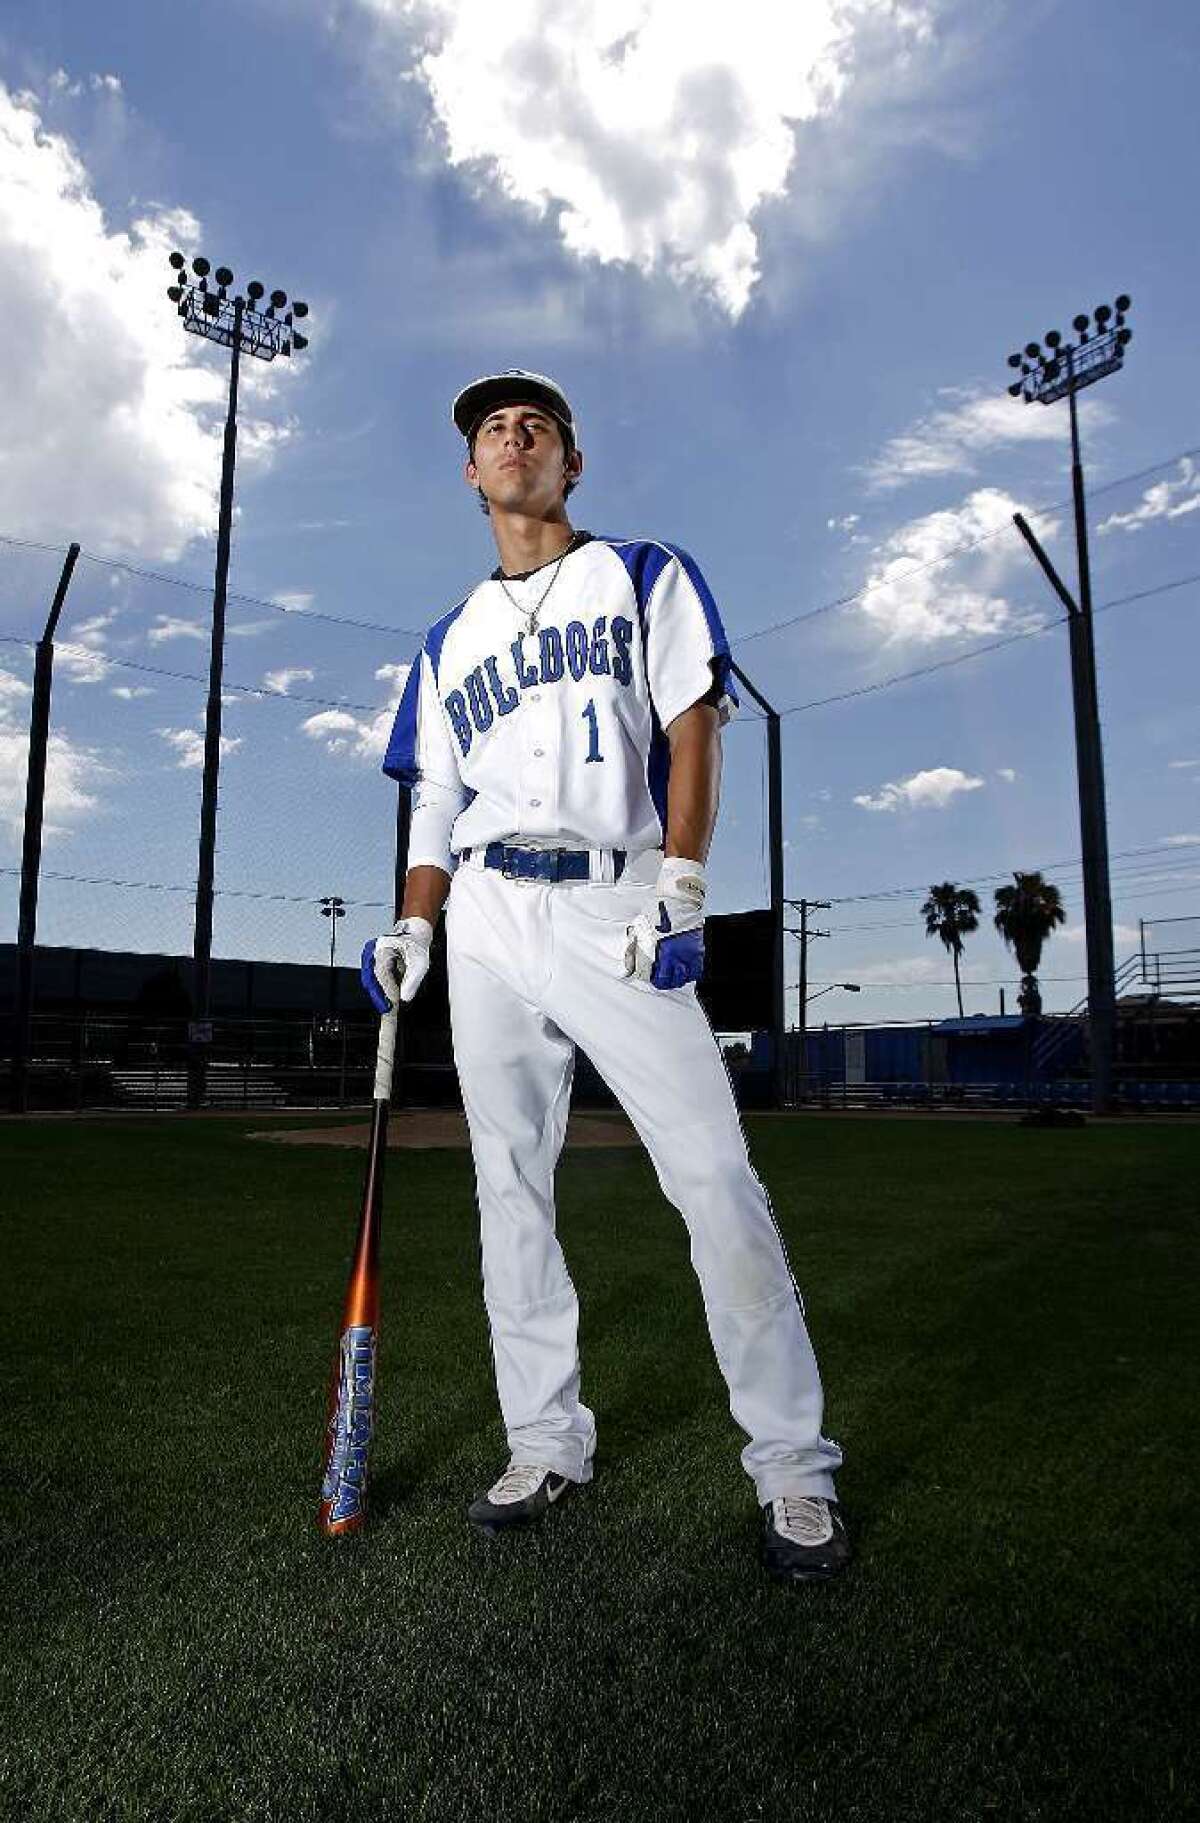 ARCHIVE PHOTO: Burbank High graduate and former Crescenta Valley High baseball player Lonnie Kauppila was selected in the 2013 Major League Baseball draft.